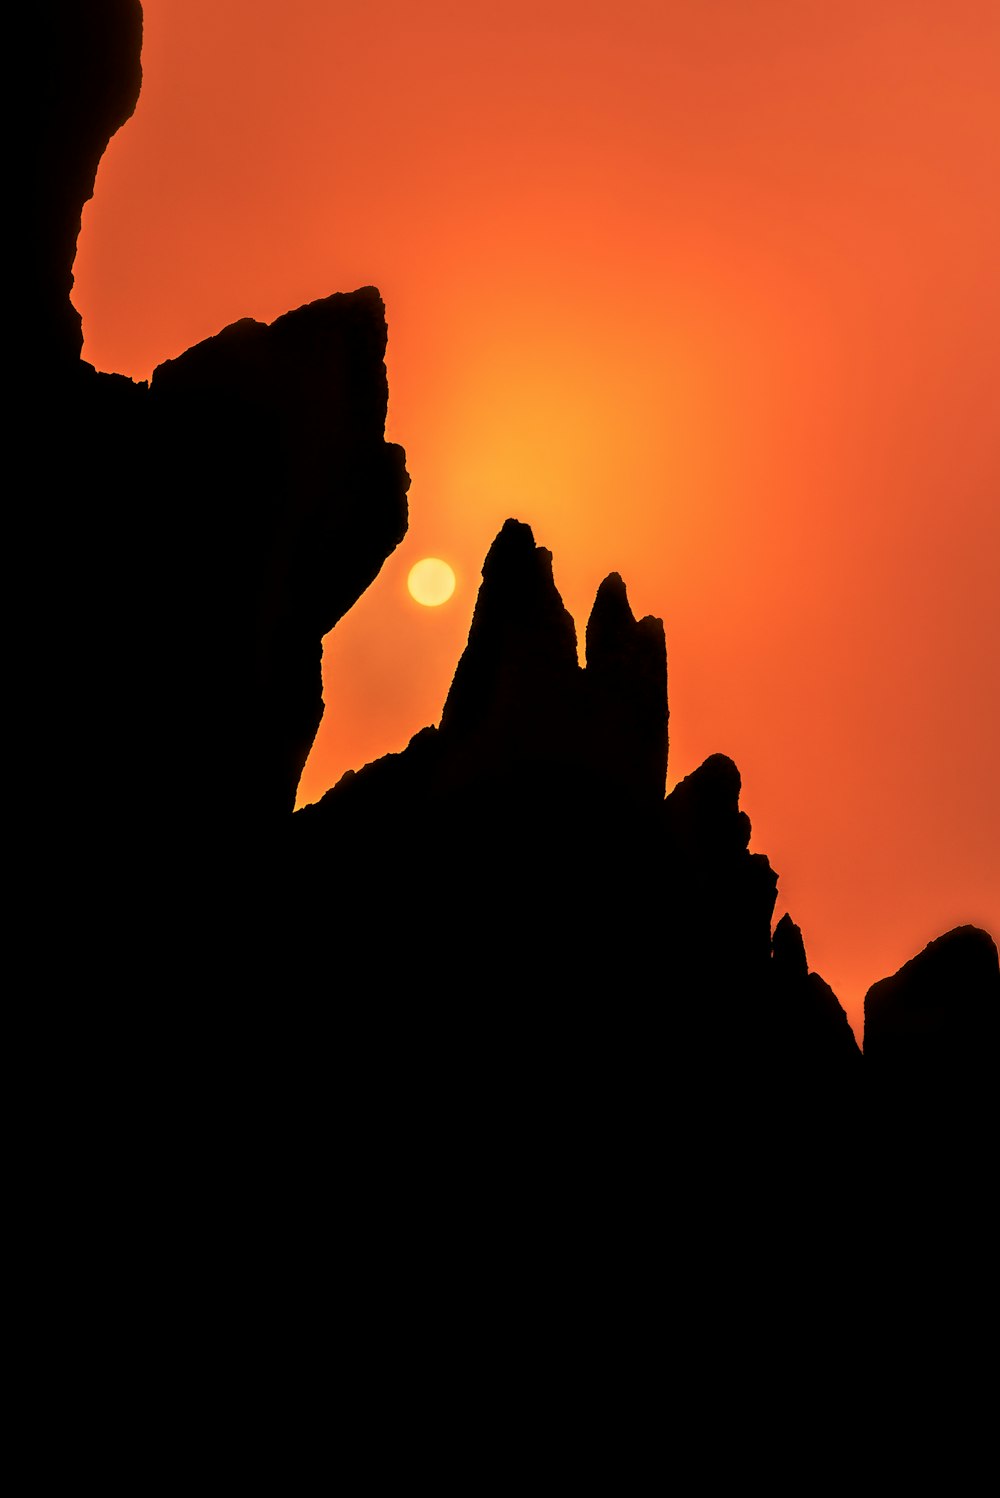 the sun is setting over a rocky outcropping